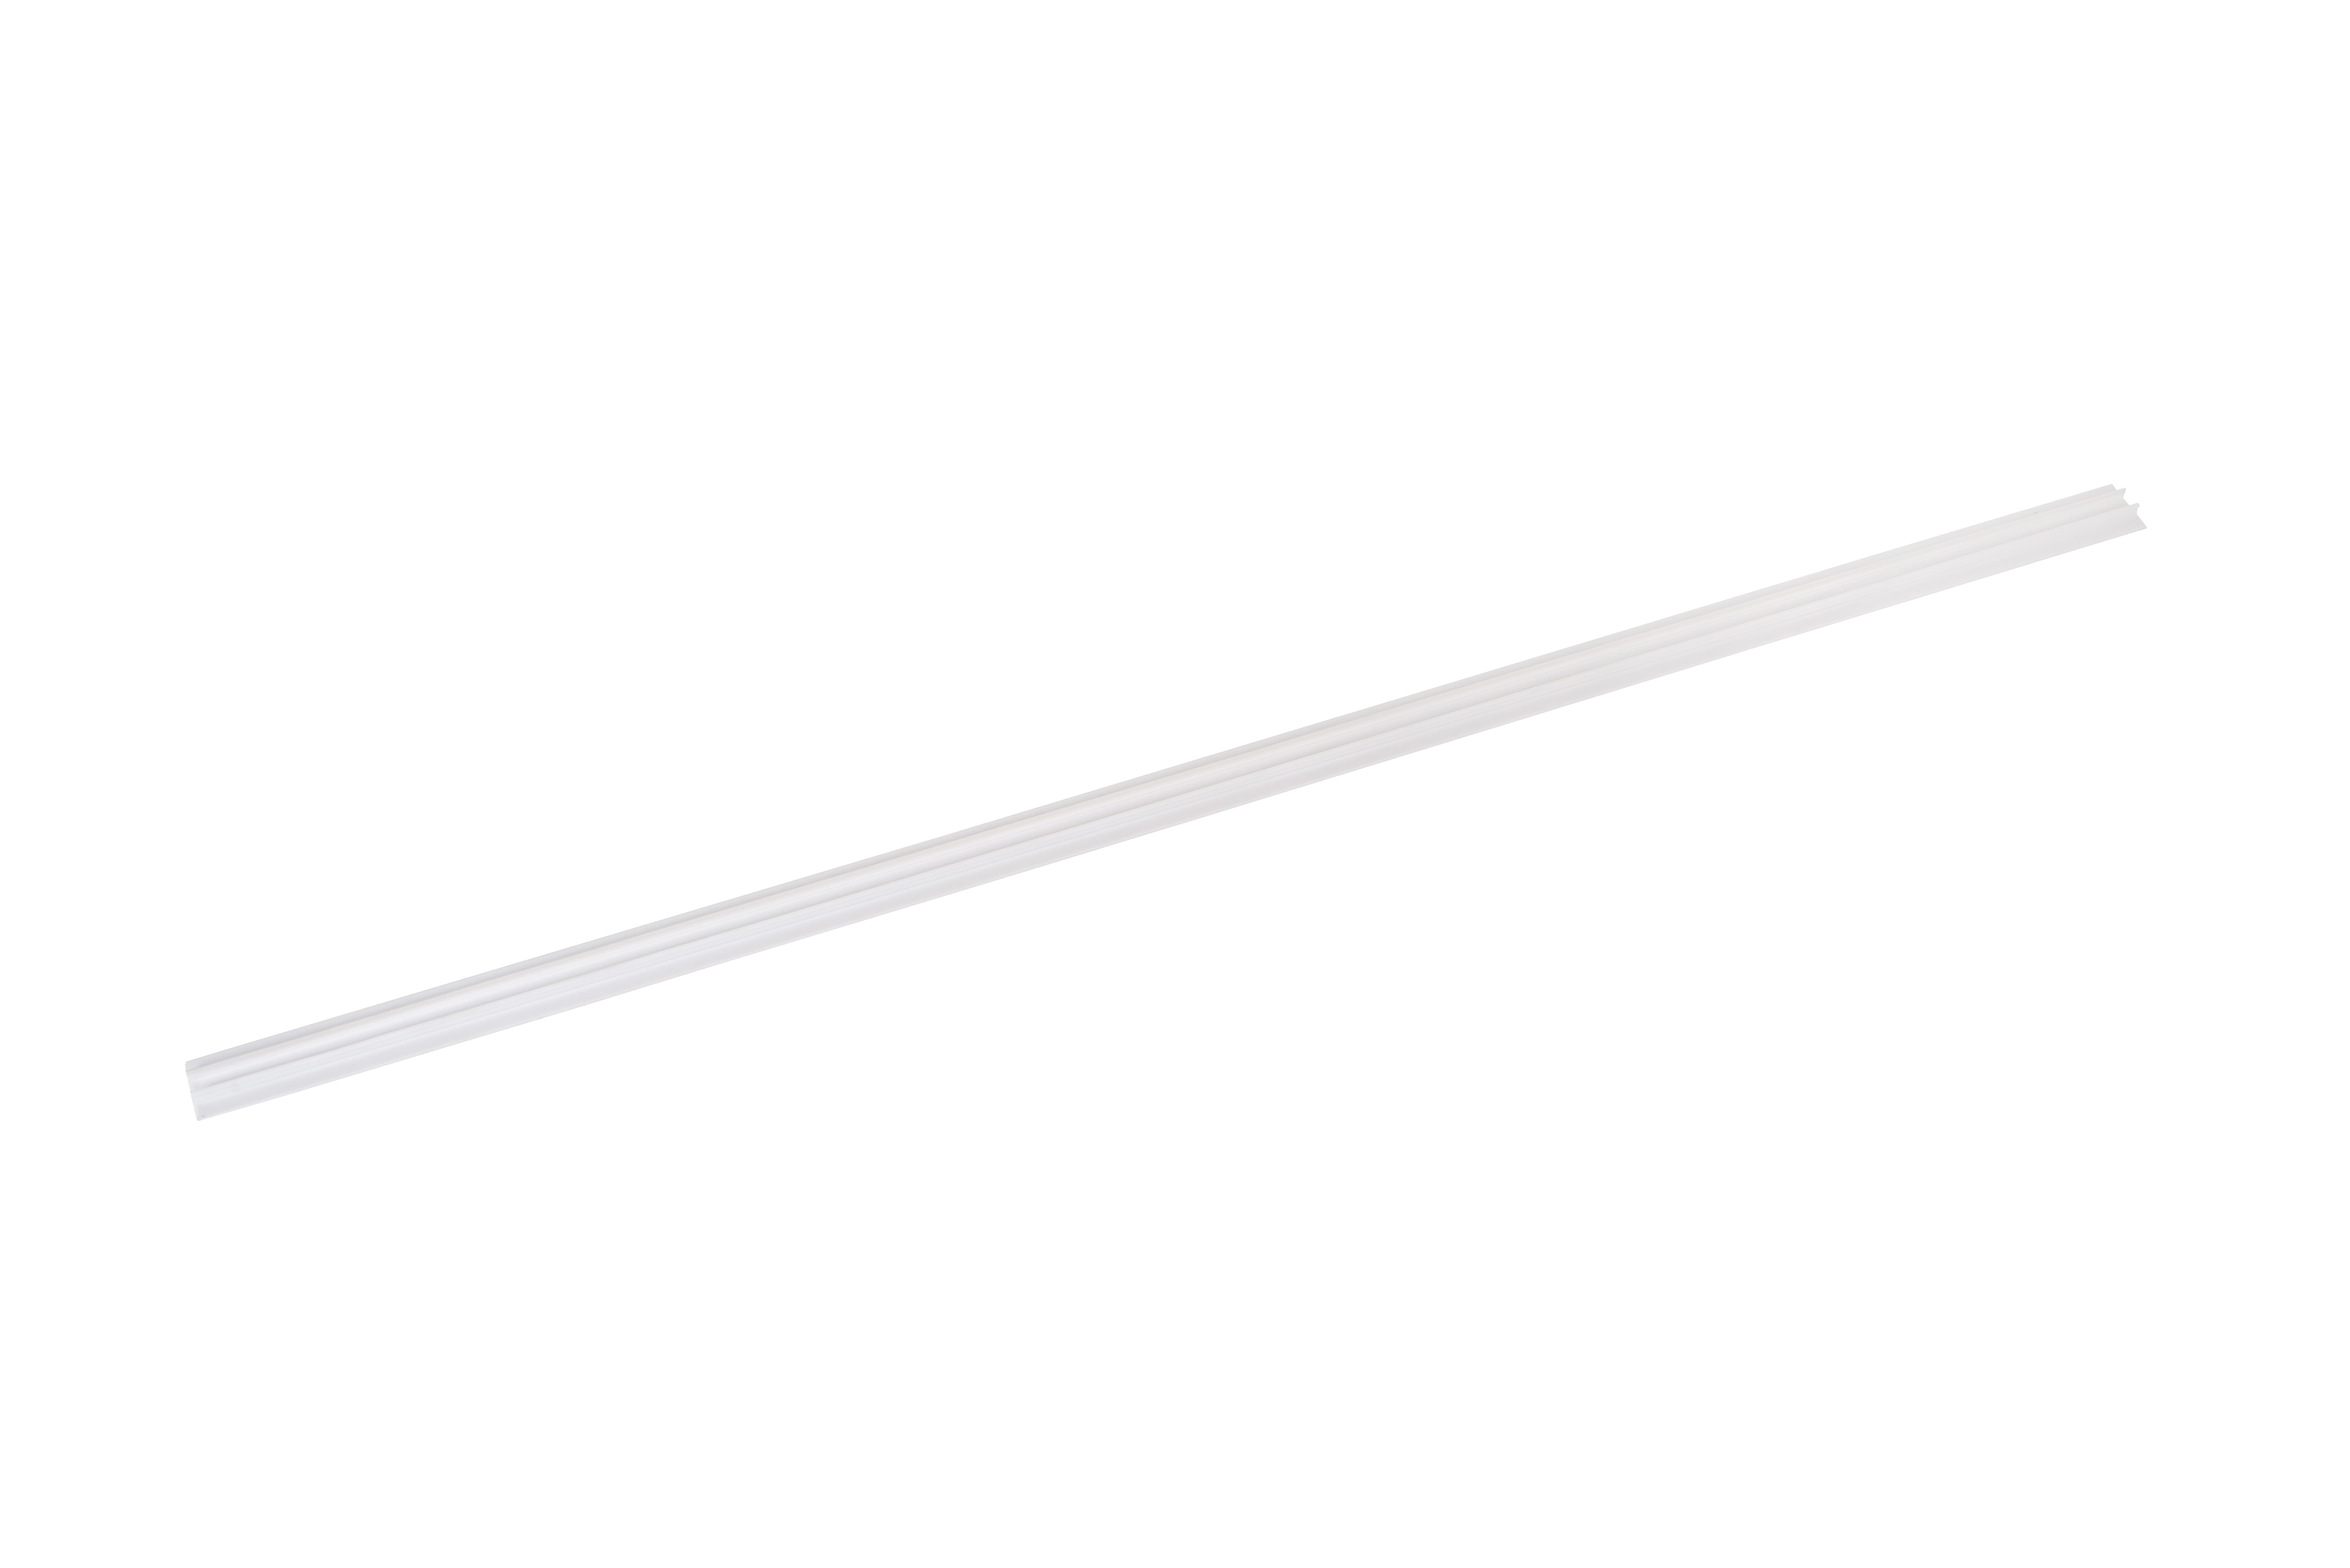 LU 09950/09/31 Lucide TRACK Cover- 1-circuit Track lighting system - 1 meter - White (Extension)